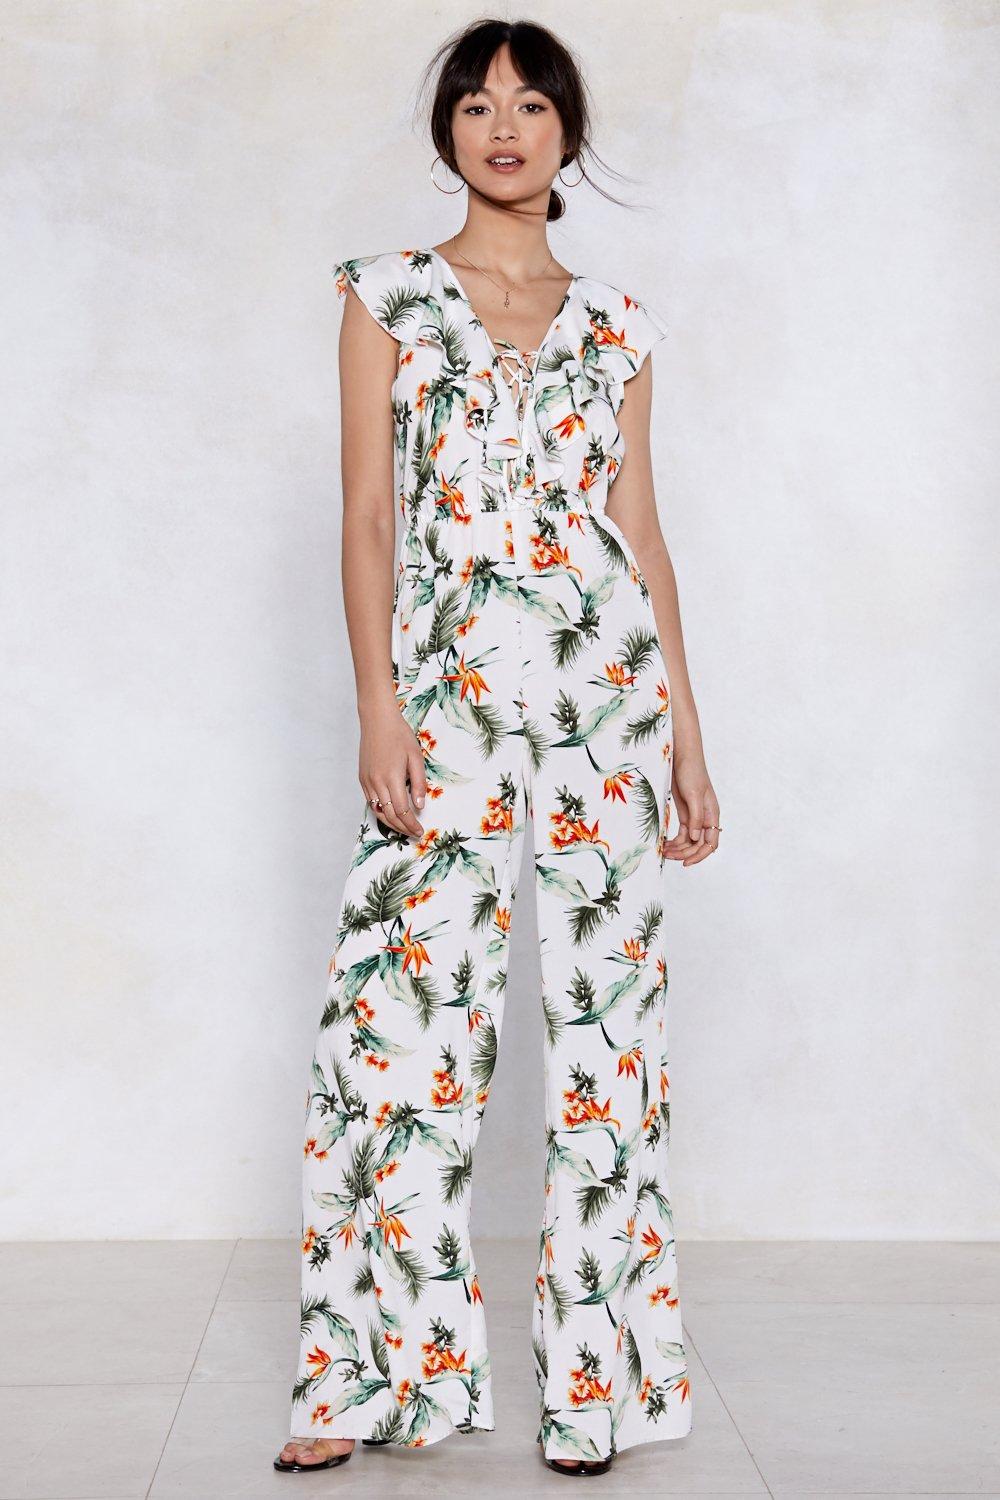 20 Classy Casual Rompers & Skirt Sets for Summer – Milk & Flowers